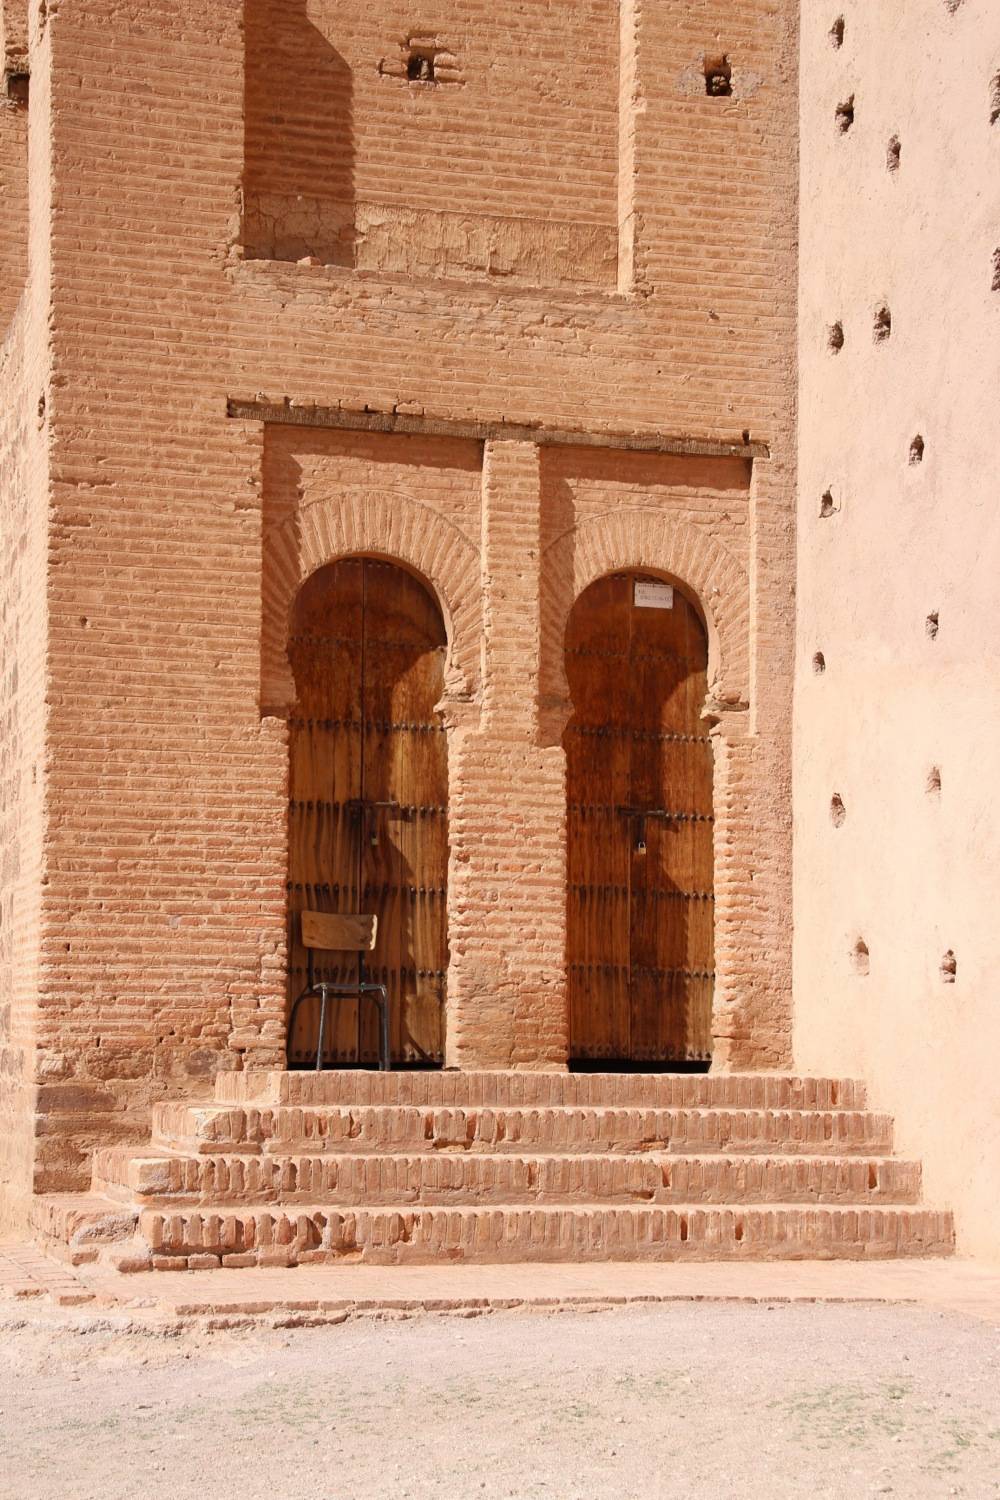 Arched doors in the facade